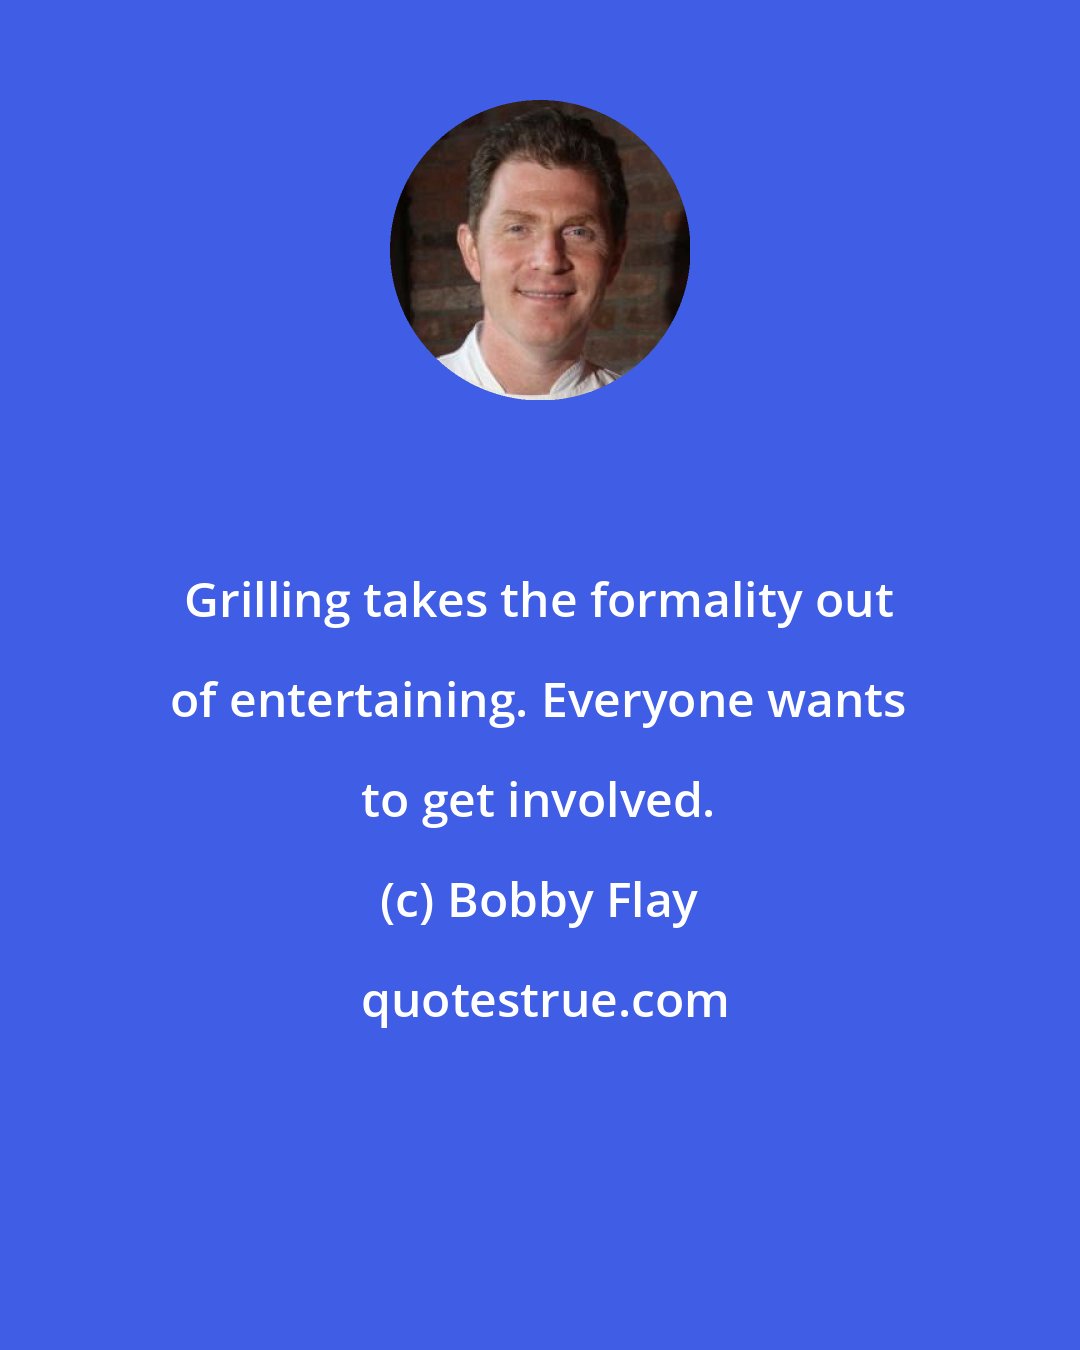 Bobby Flay: Grilling takes the formality out of entertaining. Everyone wants to get involved.